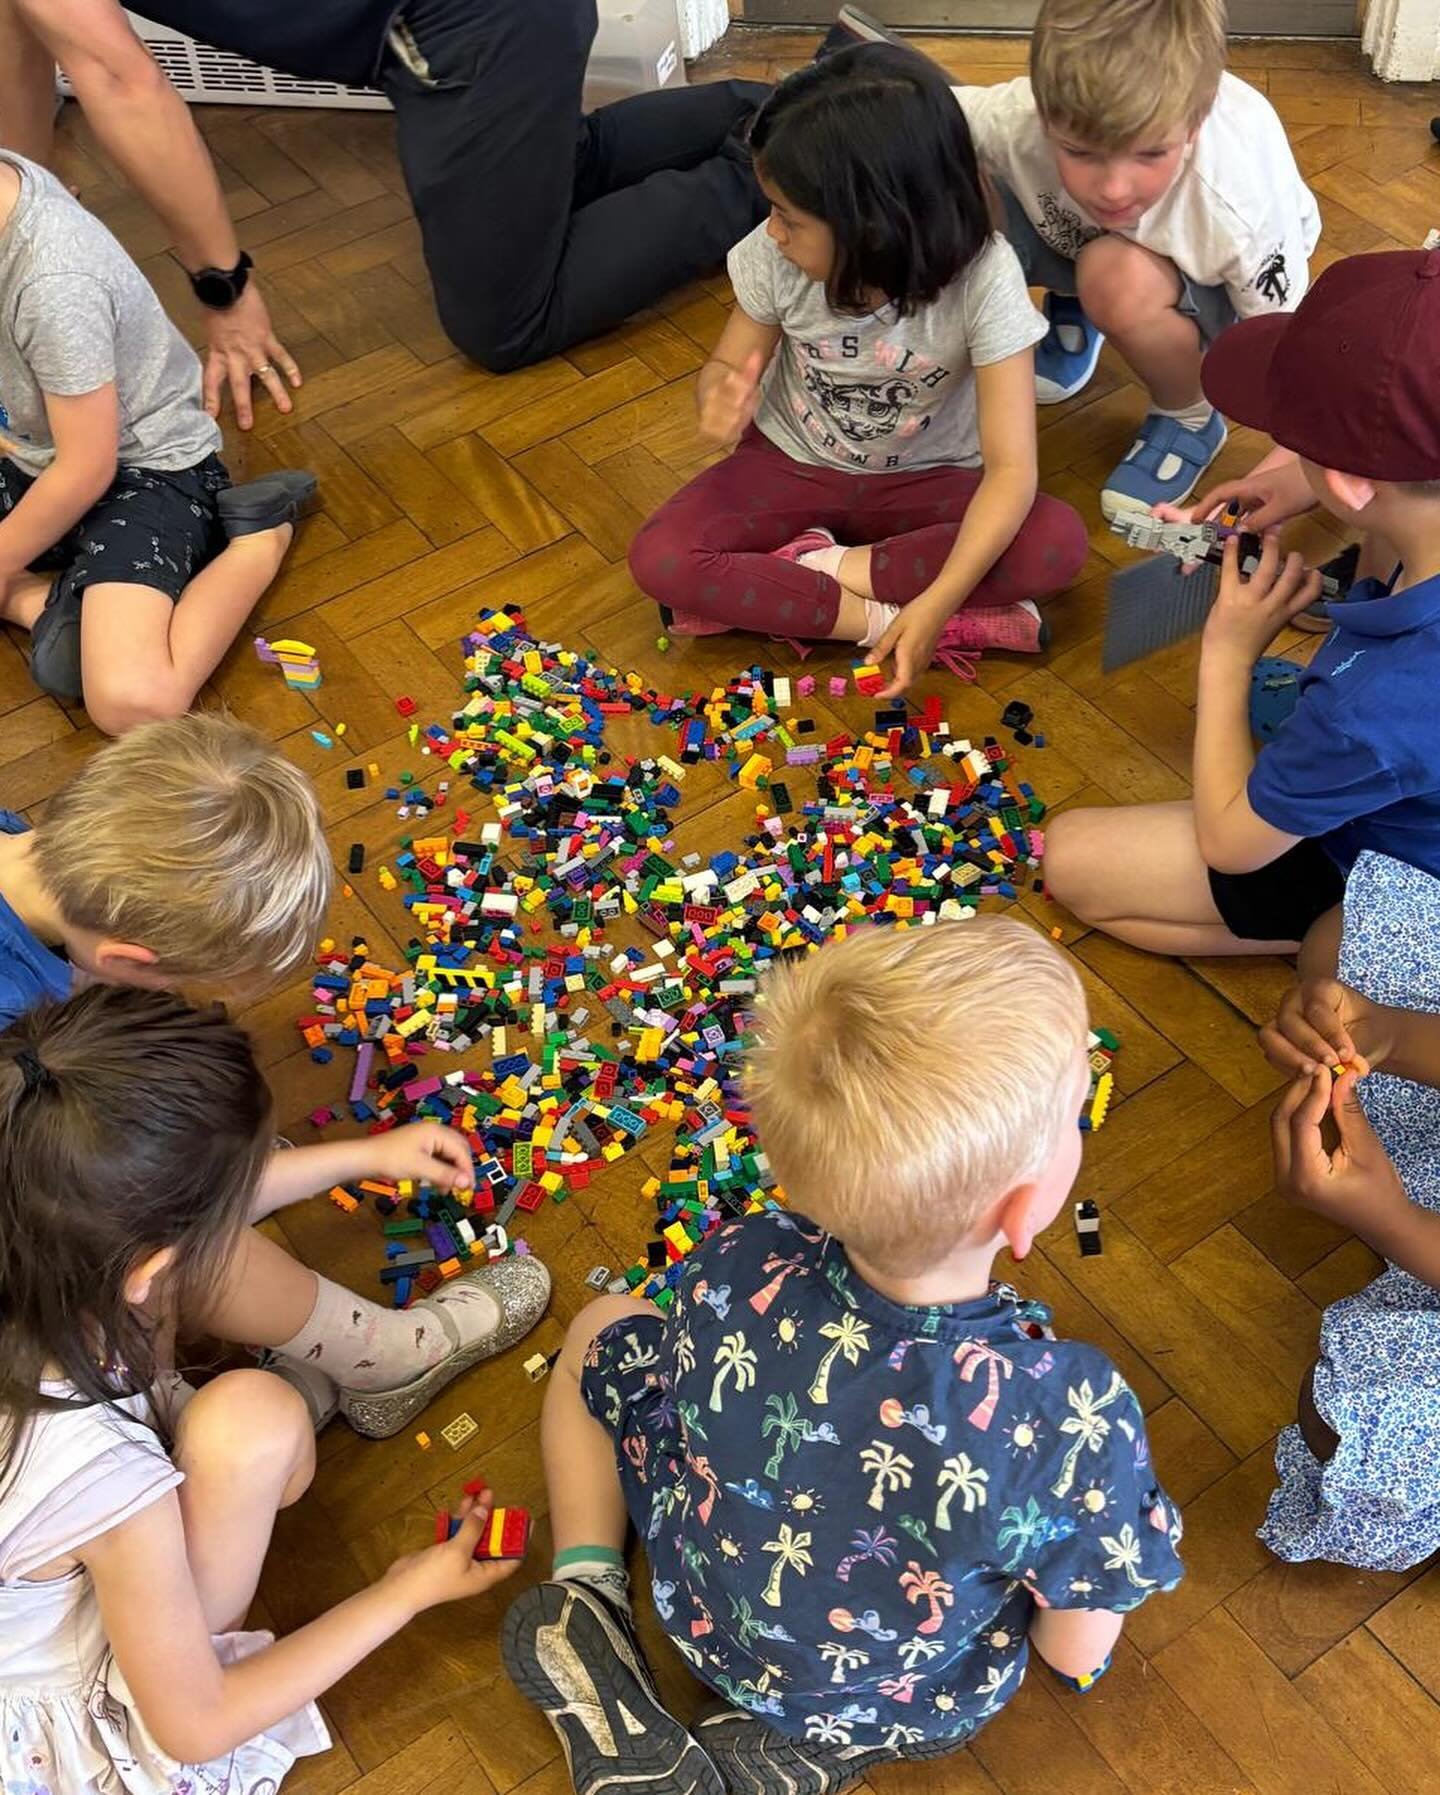 We had a fab time at Toolbox last Sunday, looking at what it means to worship God with our whole lives. The kids even made some cool guitars. Really looking forward to seeing you all this s Sunday at 10:30am!
#church #familychurch #kidsworship #famil